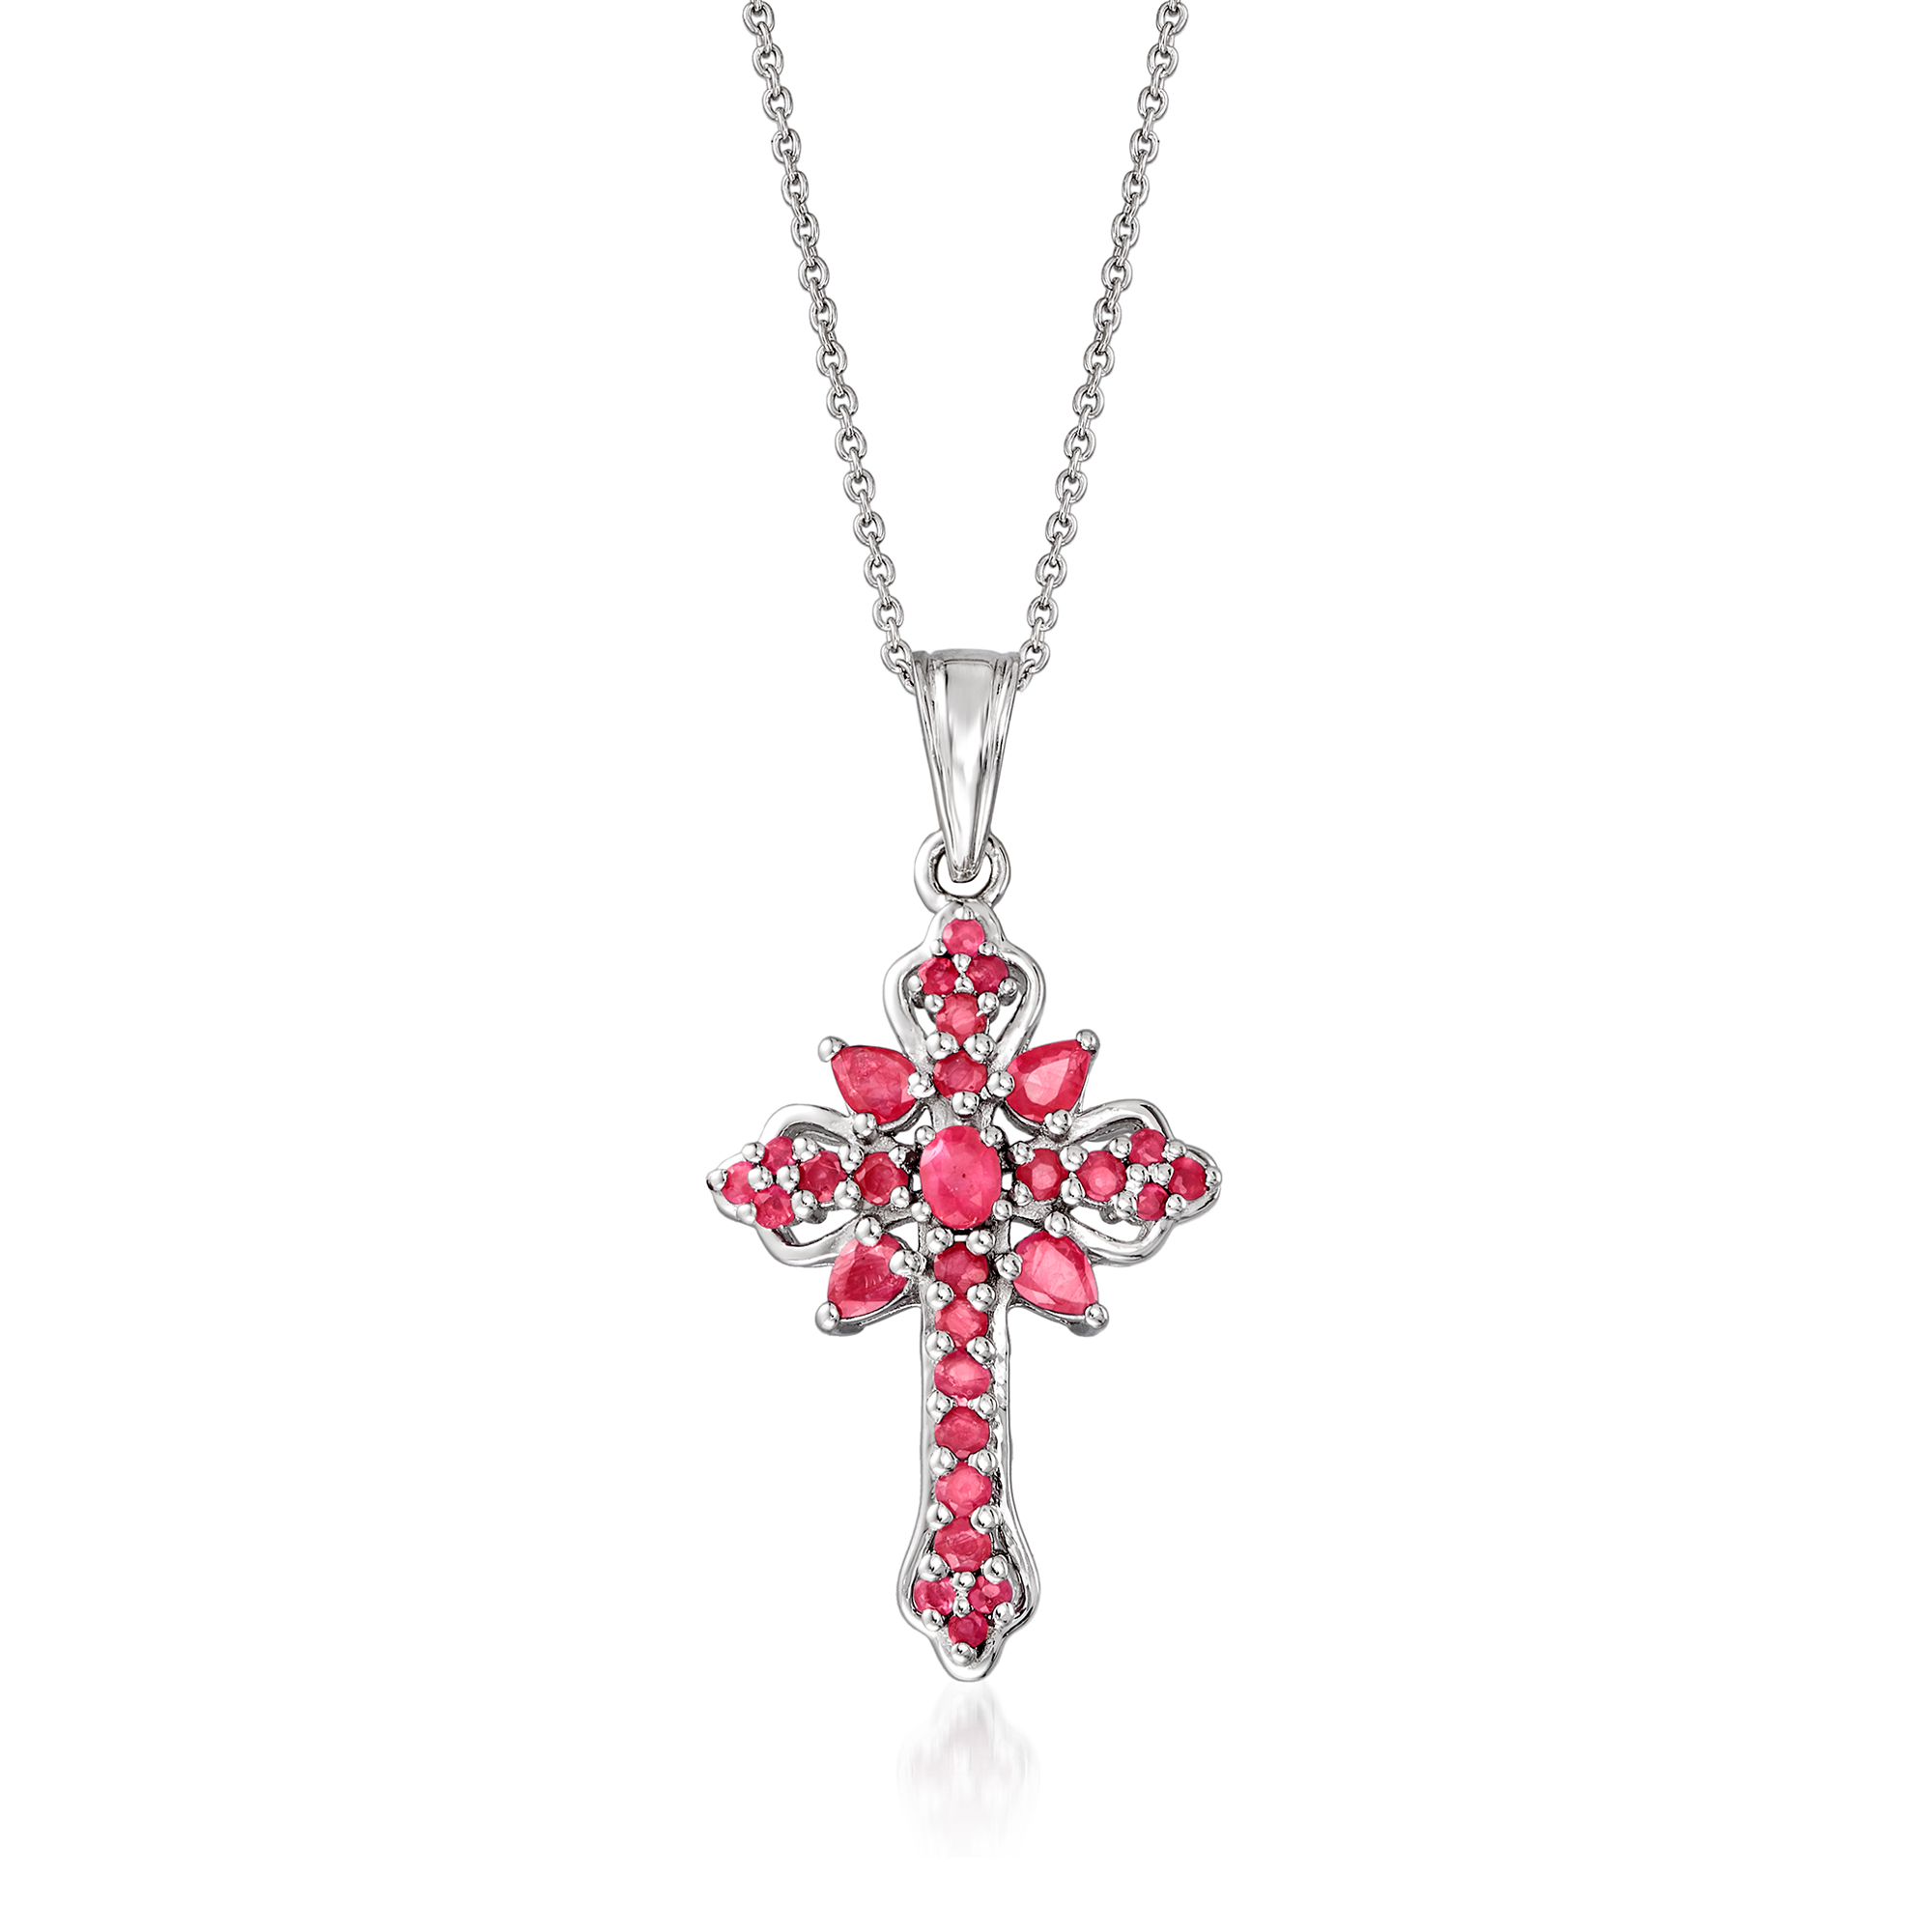 1.46 ct. t.w. Ruby Cross Pendant Necklace in Sterling Silver. 18